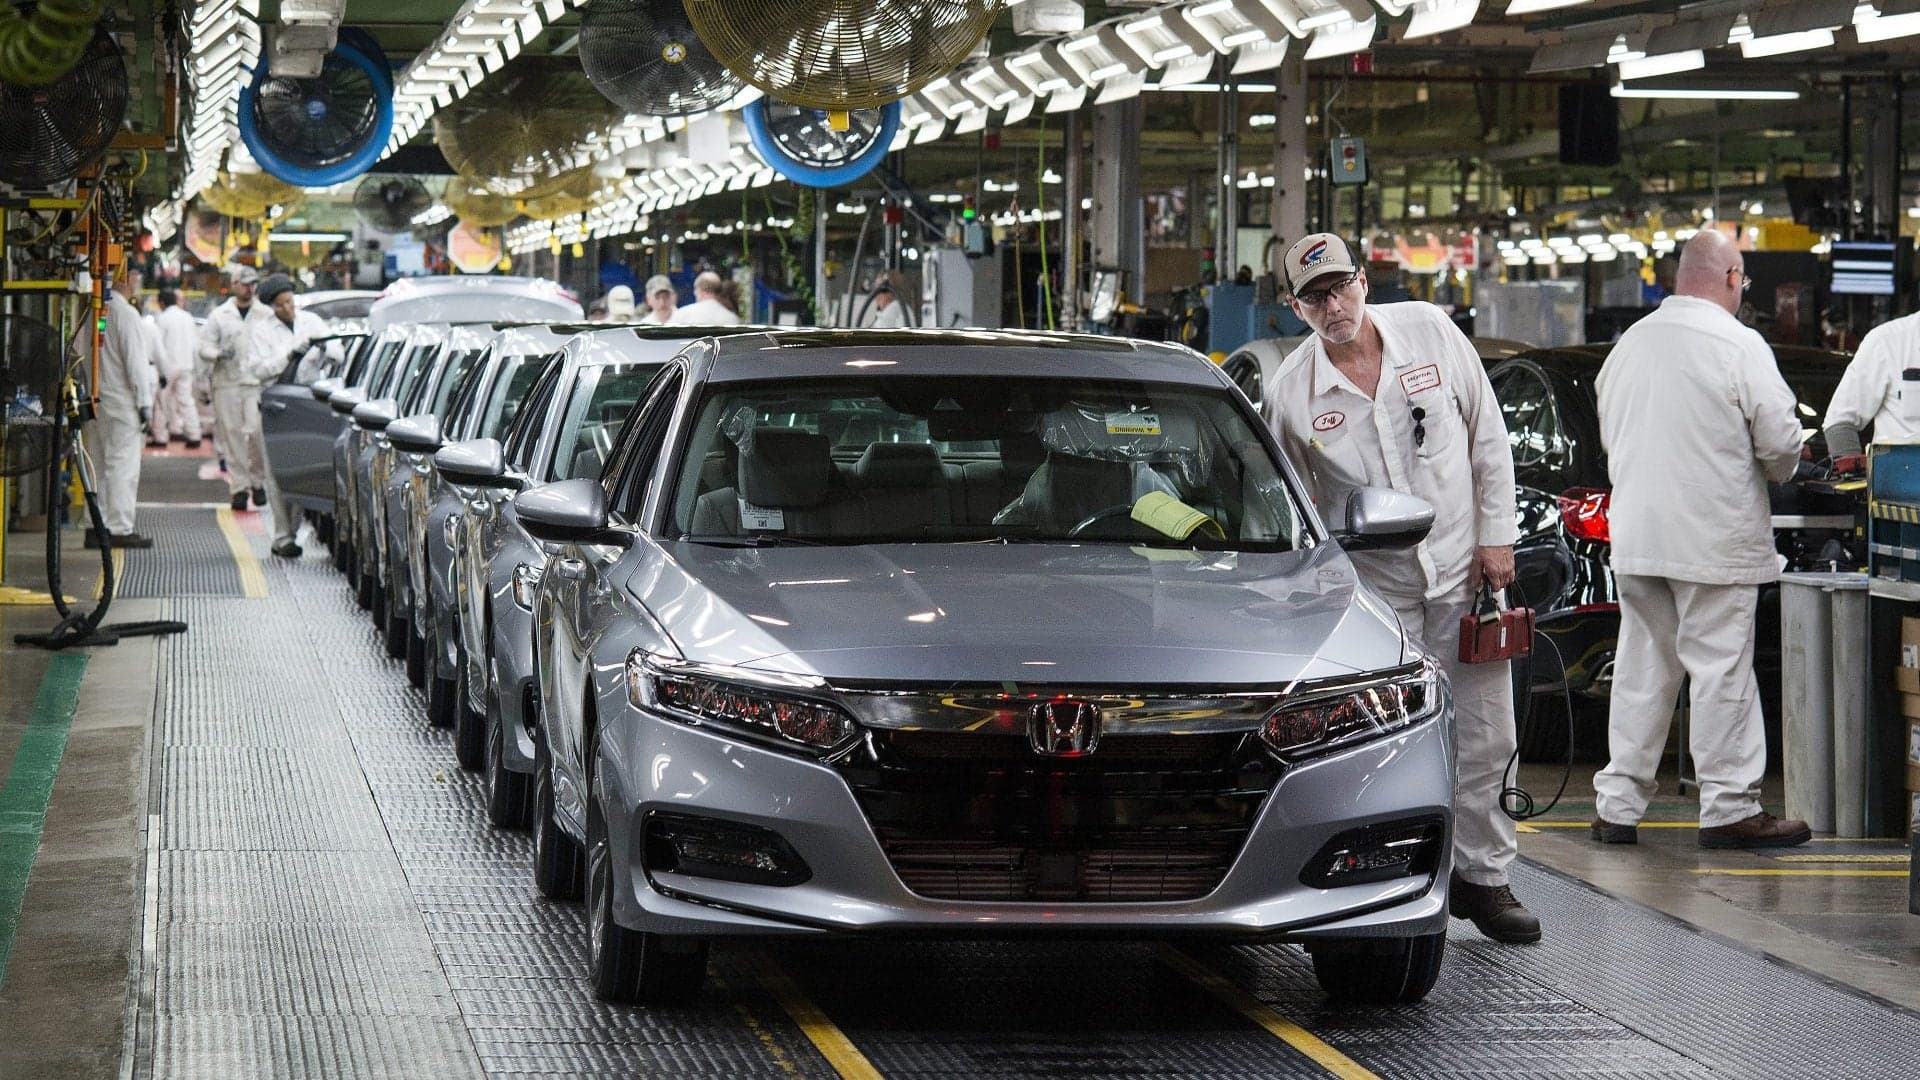 Honda Halting Accord Production for 11 Days Due to Slow Sales